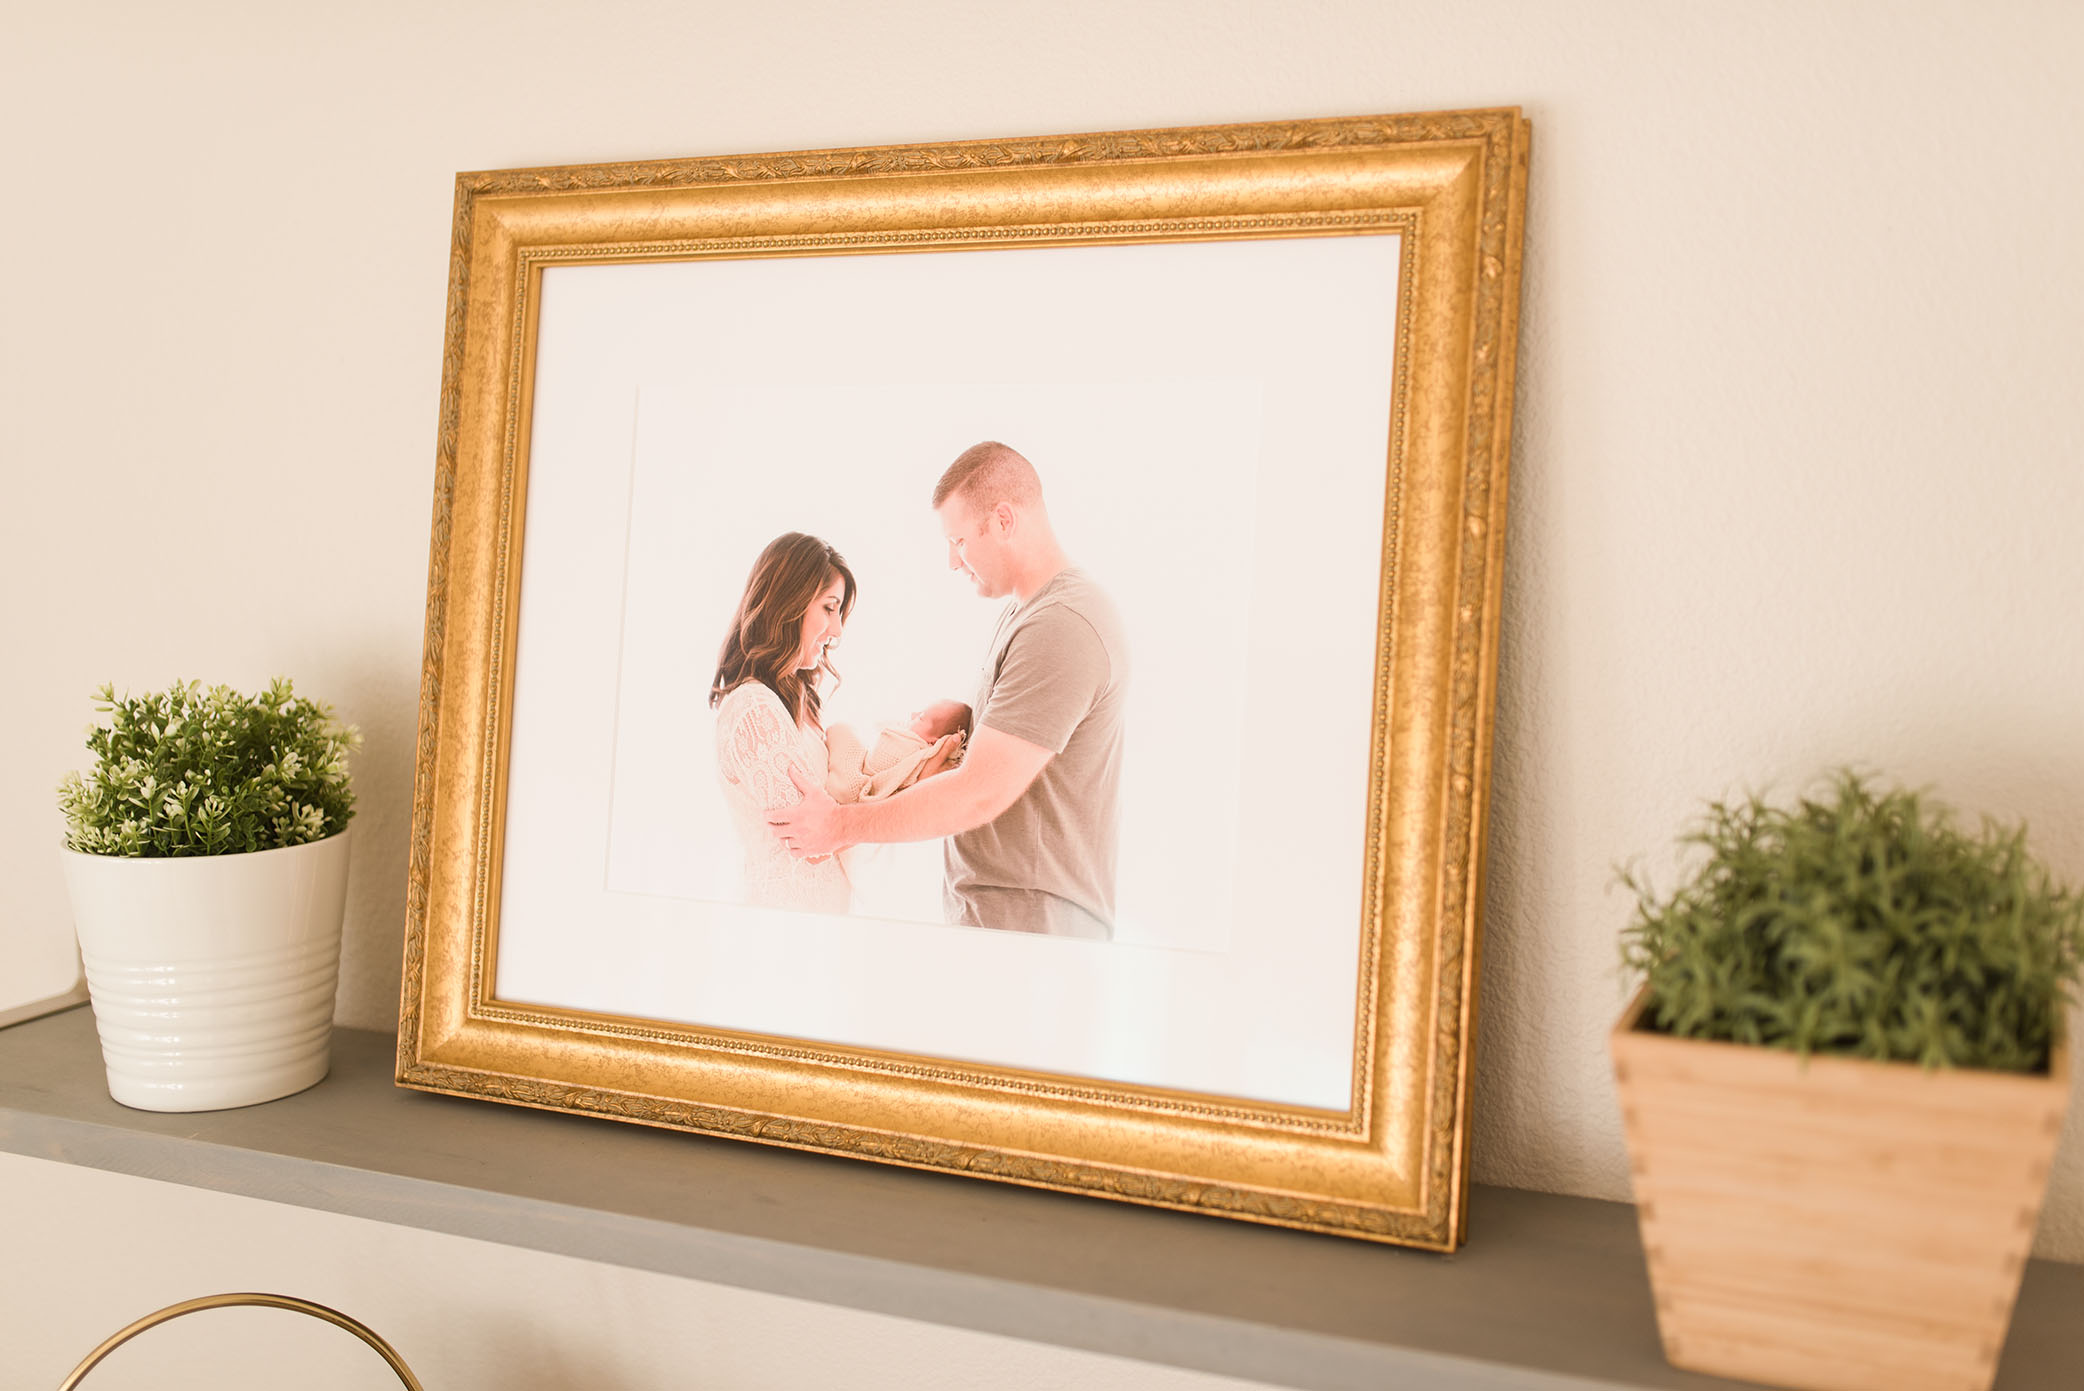 A photographer's studio gets lots of natural light, captured by Sweet Beginnings Photography by Stephanie, a Sacramento Newborn and Family Photographer